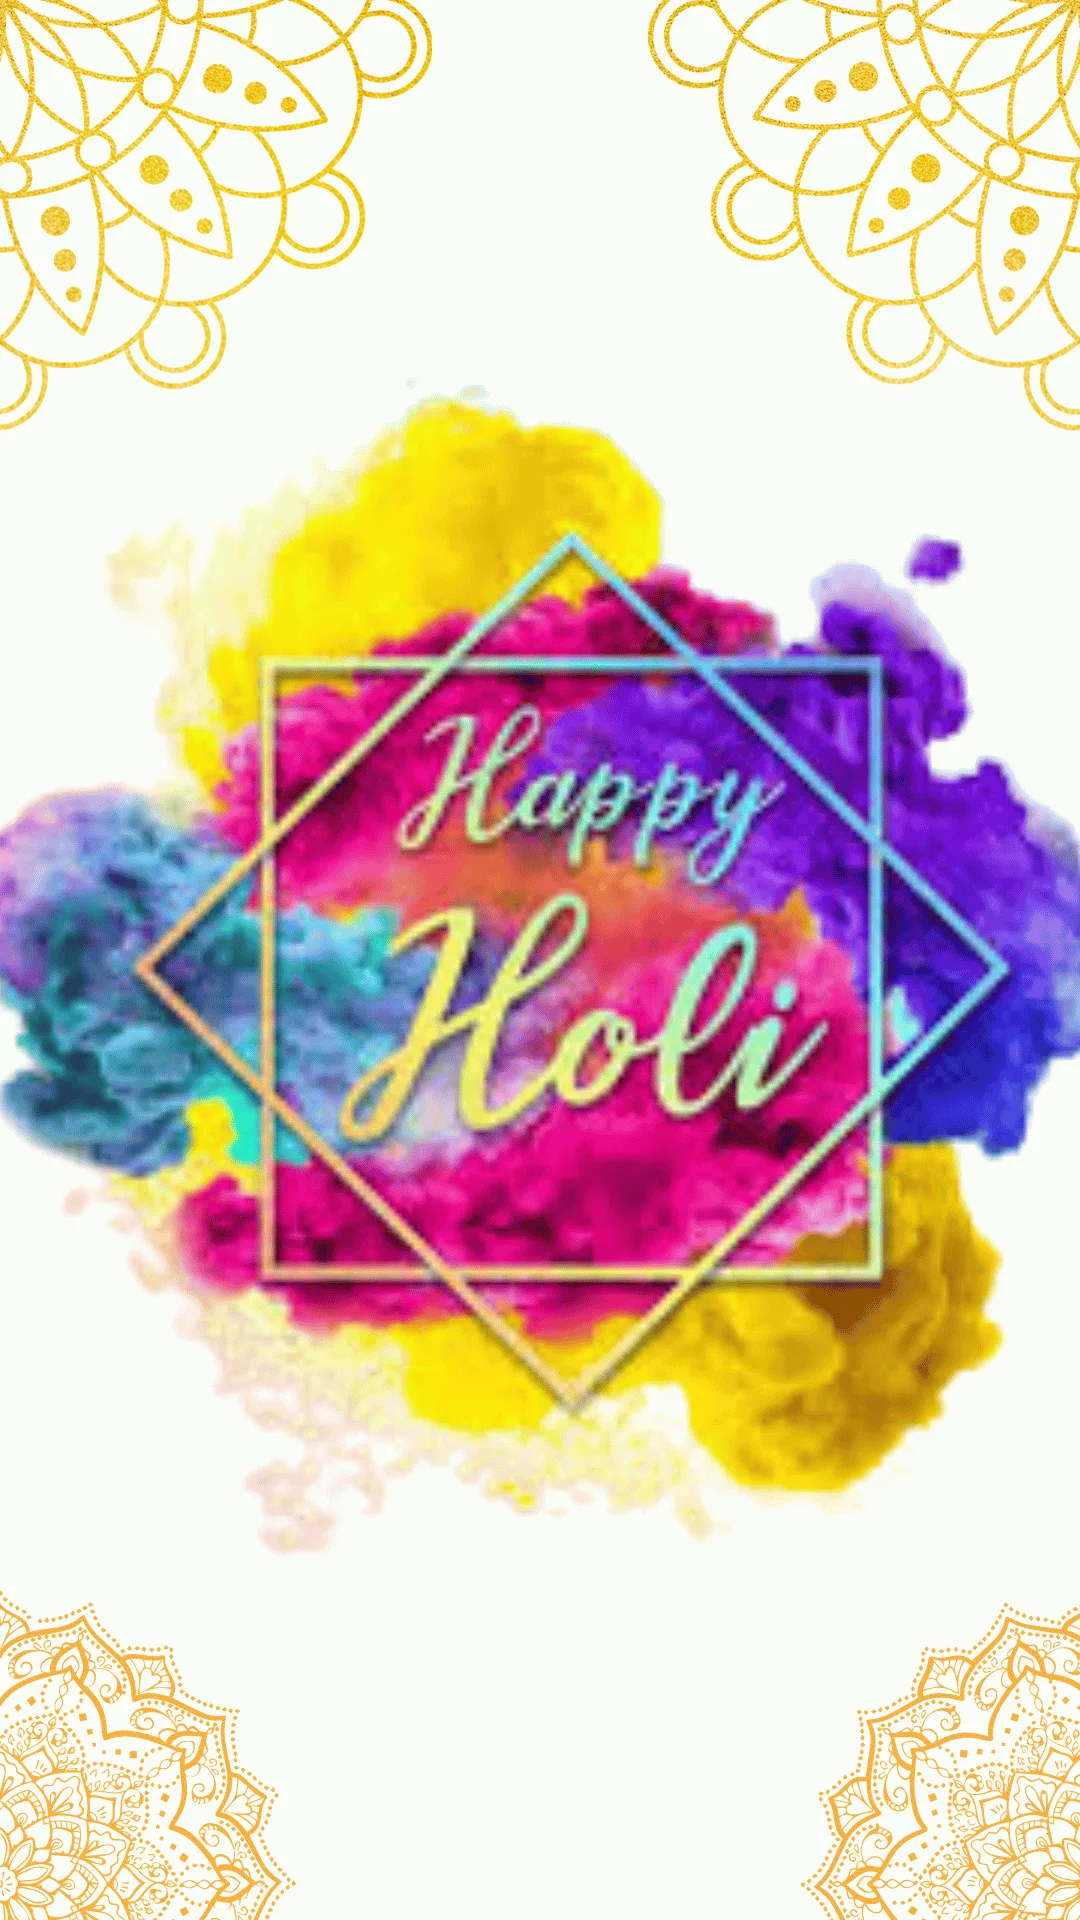 Happy Holi Offers Logo Banner Icon Stock Vector (Royalty Free) 1664693245 |  Shutterstock